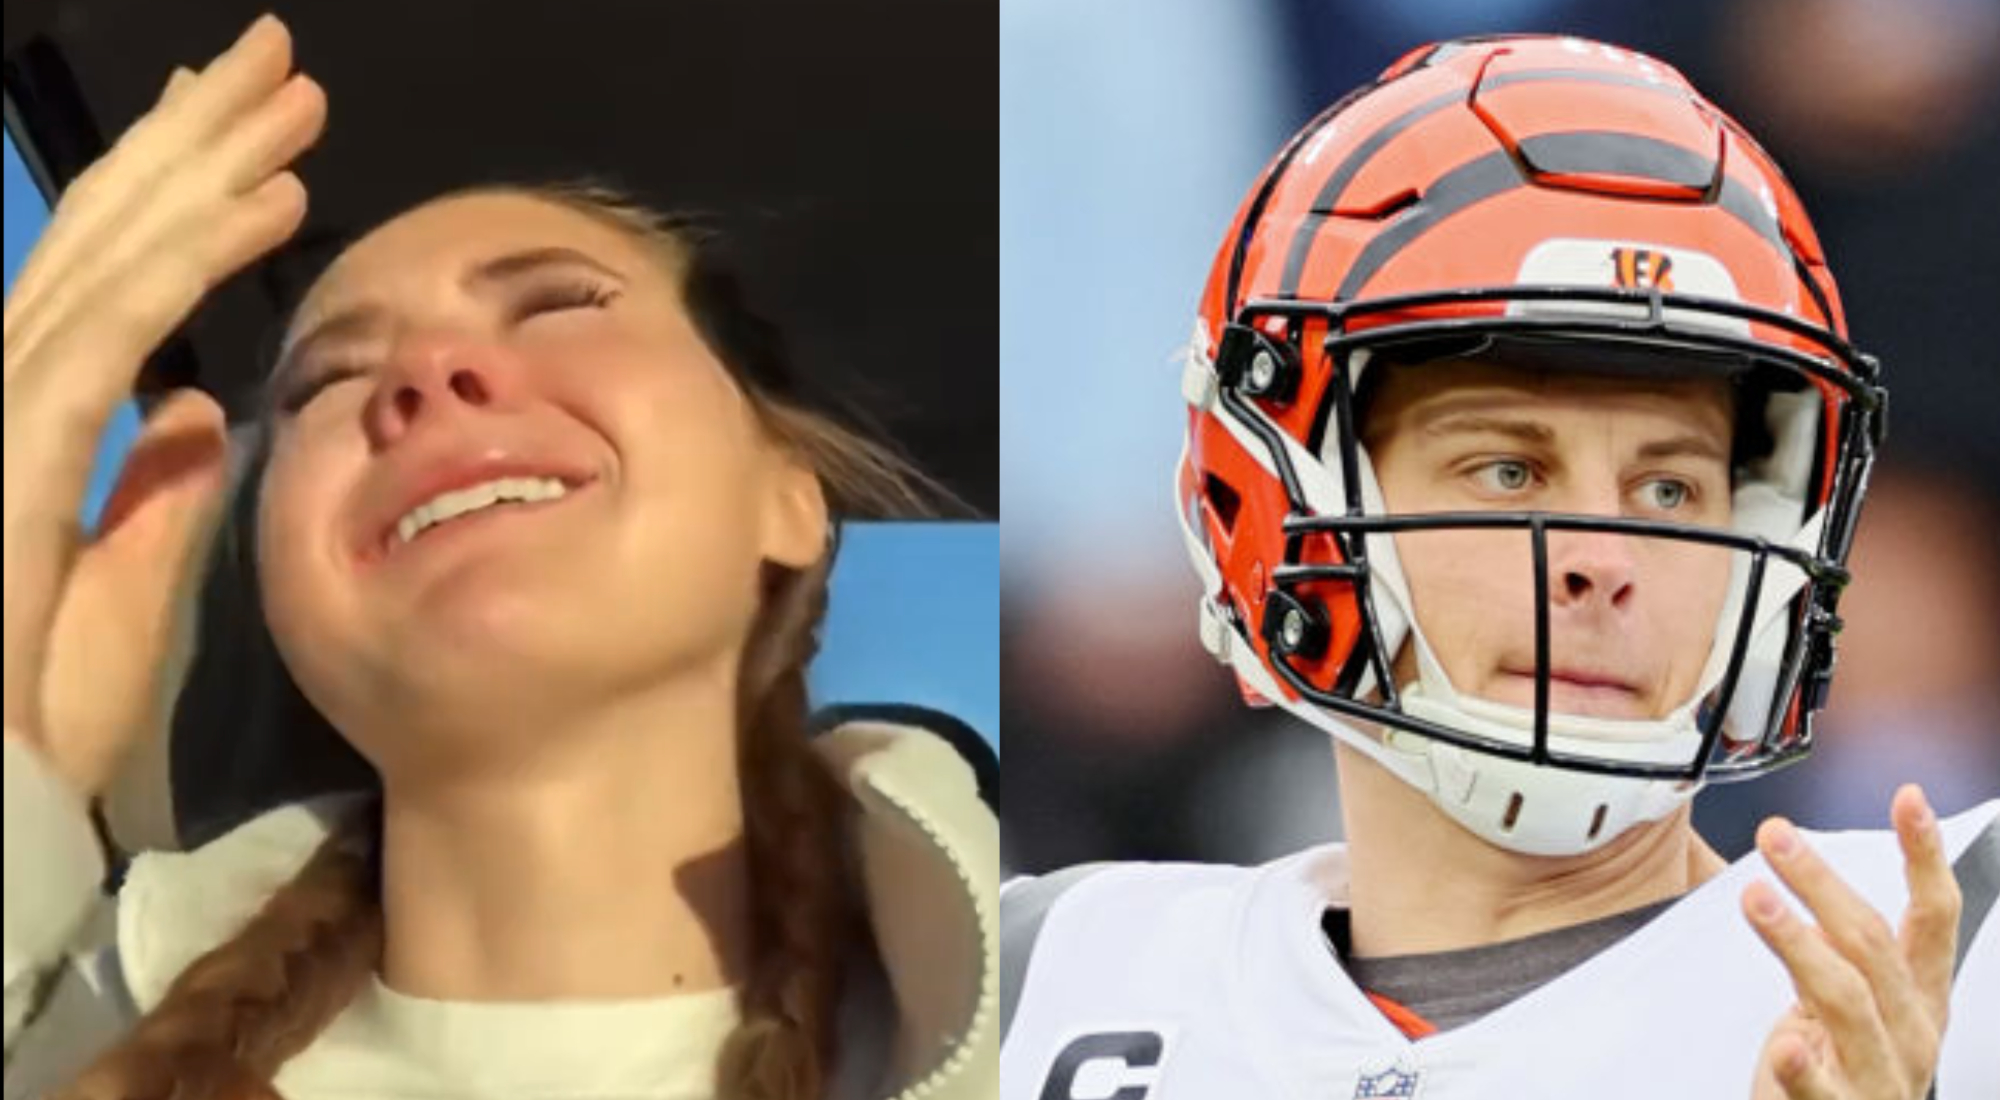 Bengals fan has wisdom teeth out and is terrified of Patrick Mahomes